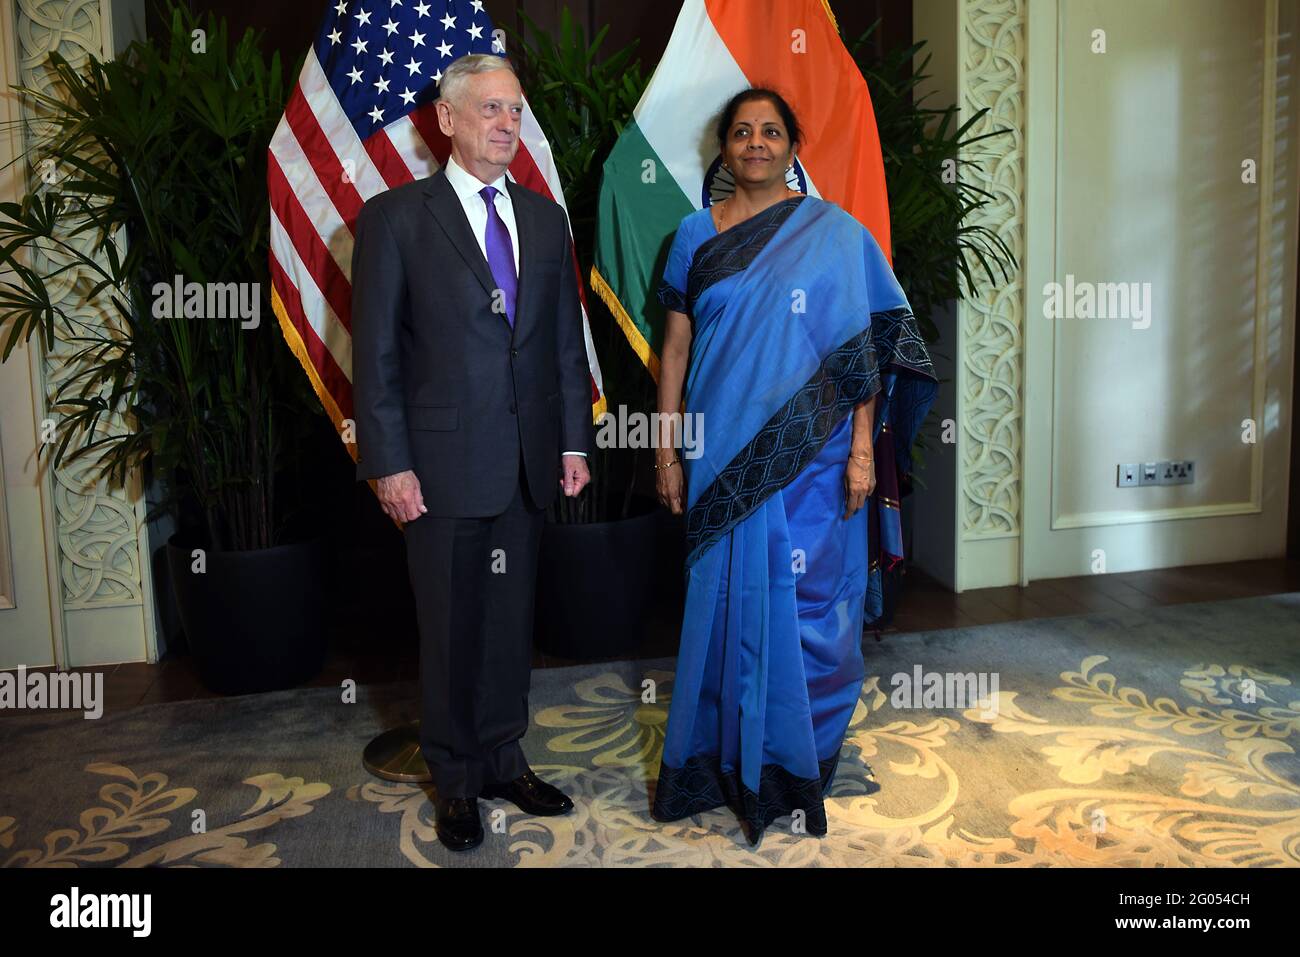 Reportage:  U.S. Secretary of Defense James Mattis meets with Indian Minister of Defense Nirmala Sitharaman at the ASEAN Defense Ministers Meeting, Singapore, Oct. 19, 2018. Stock Photo